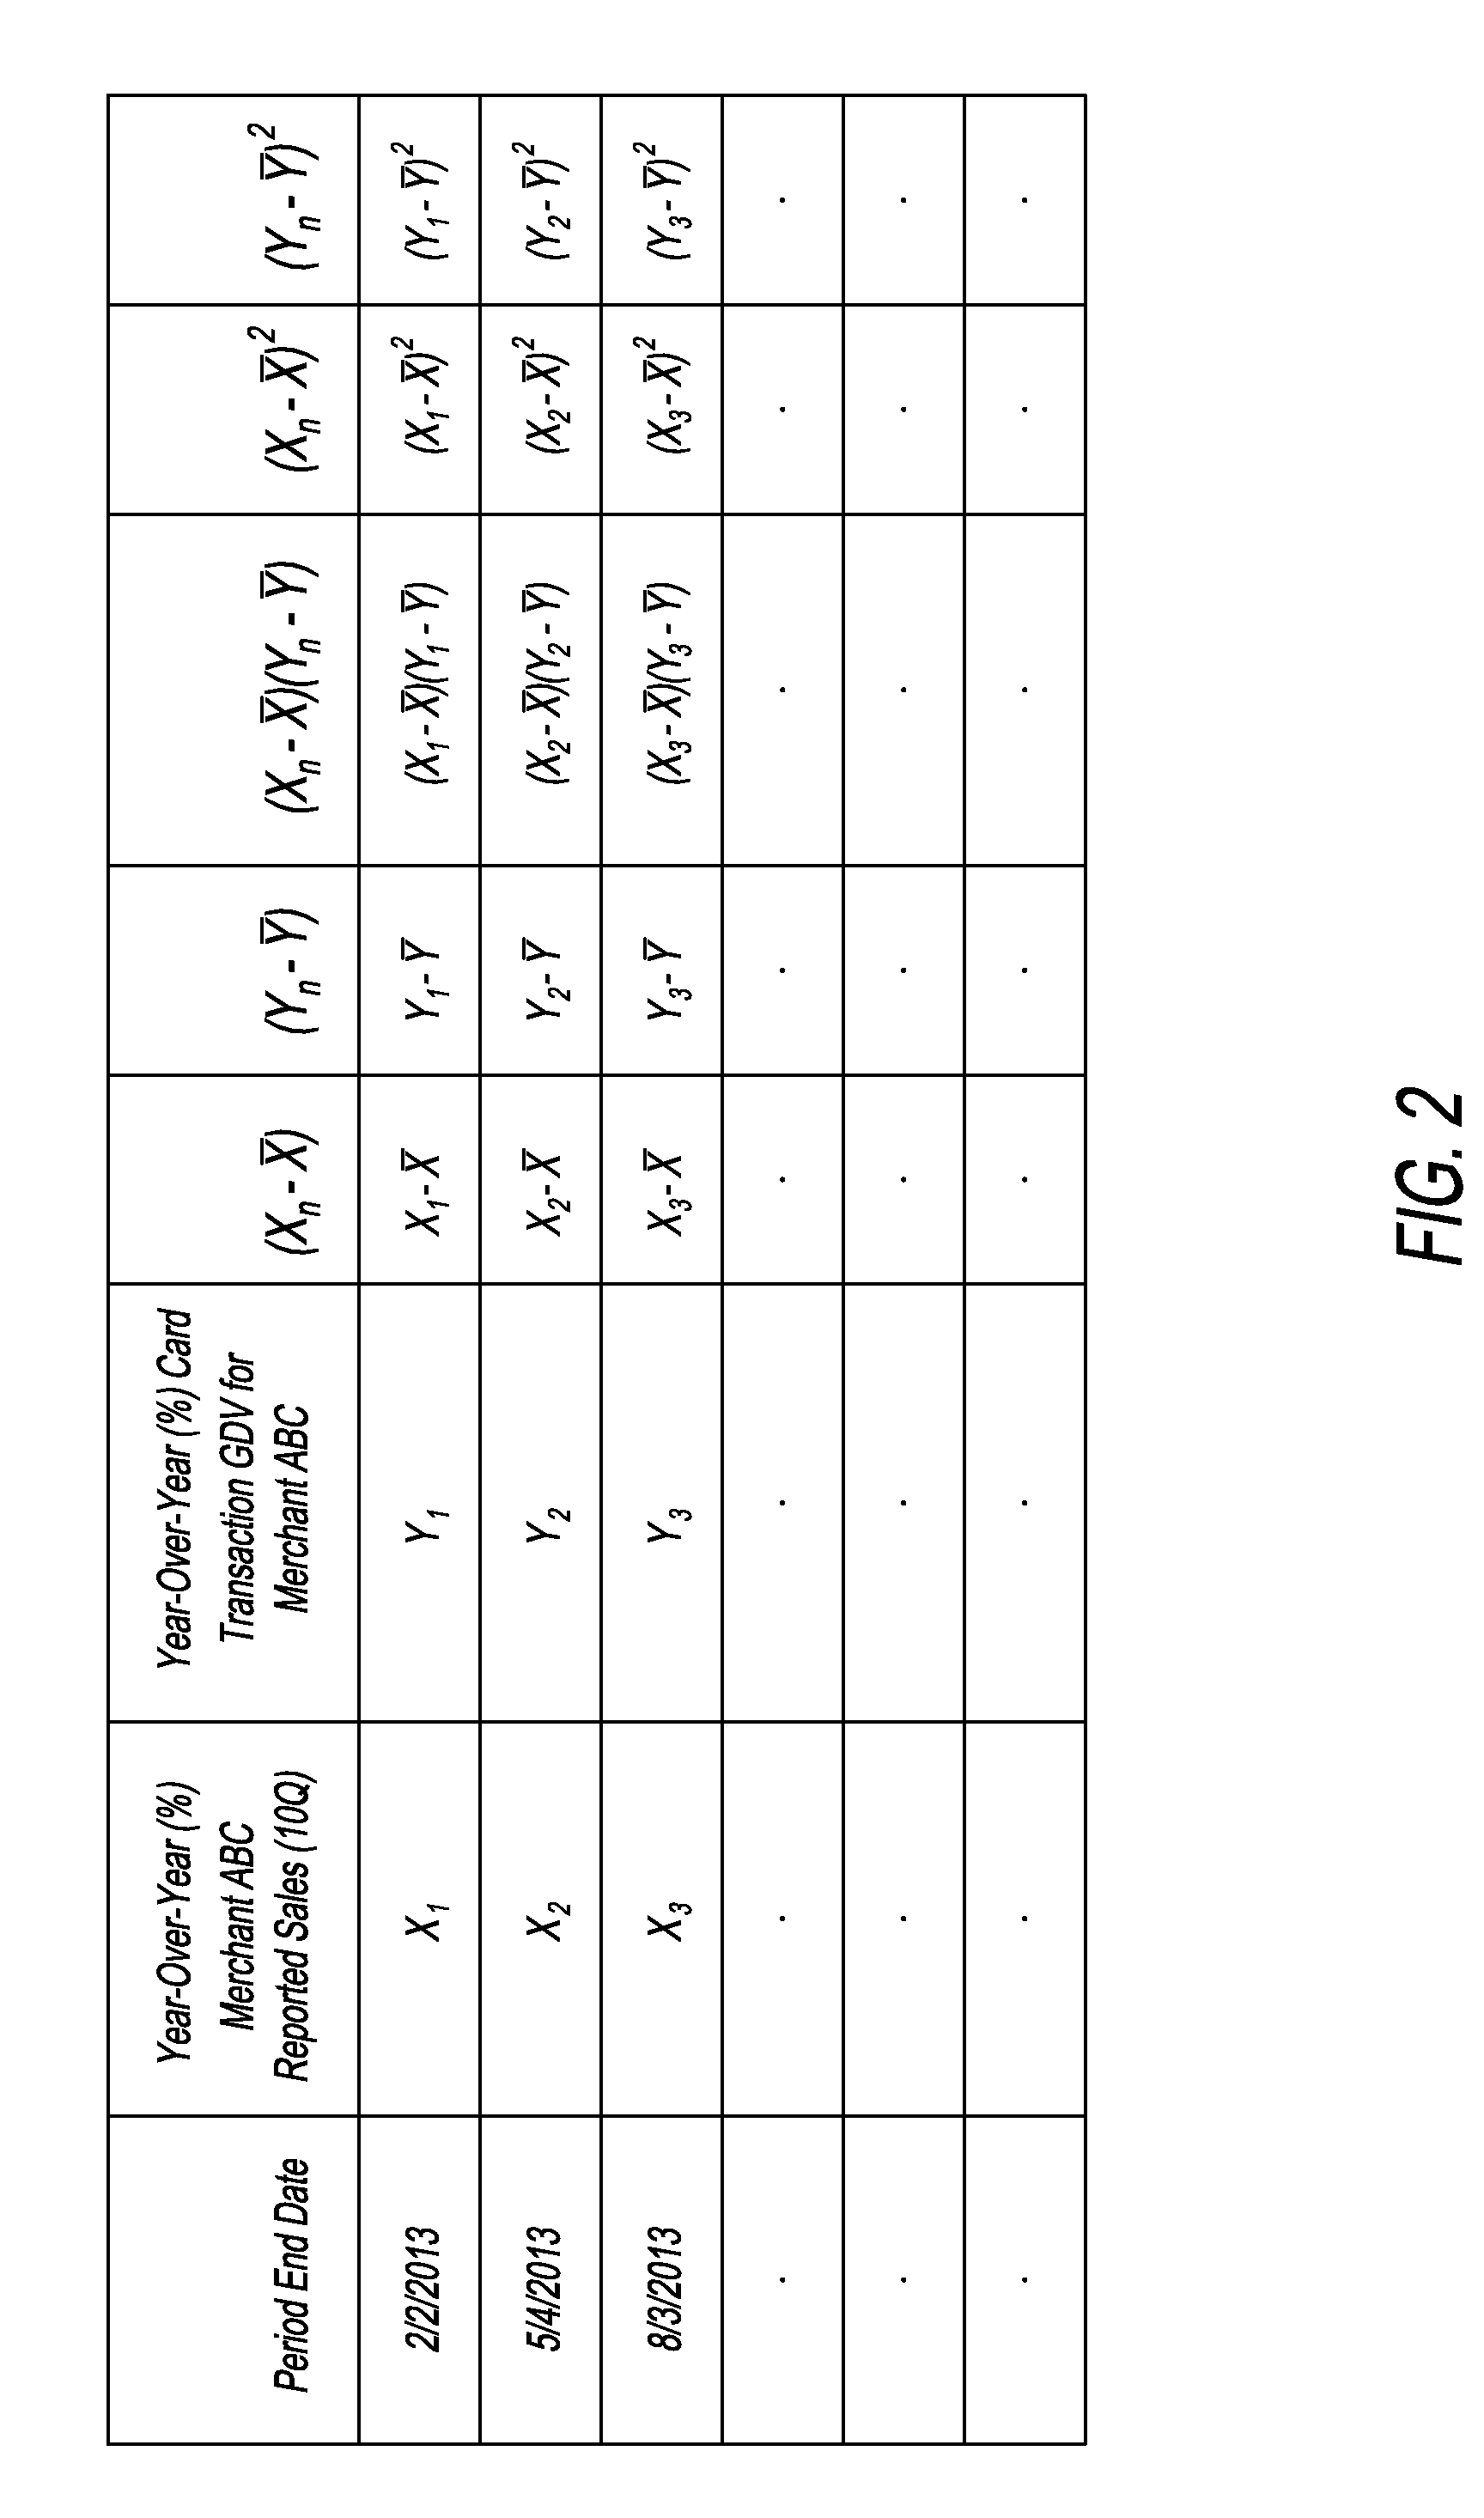 Method and system for validation of merchant aggregation